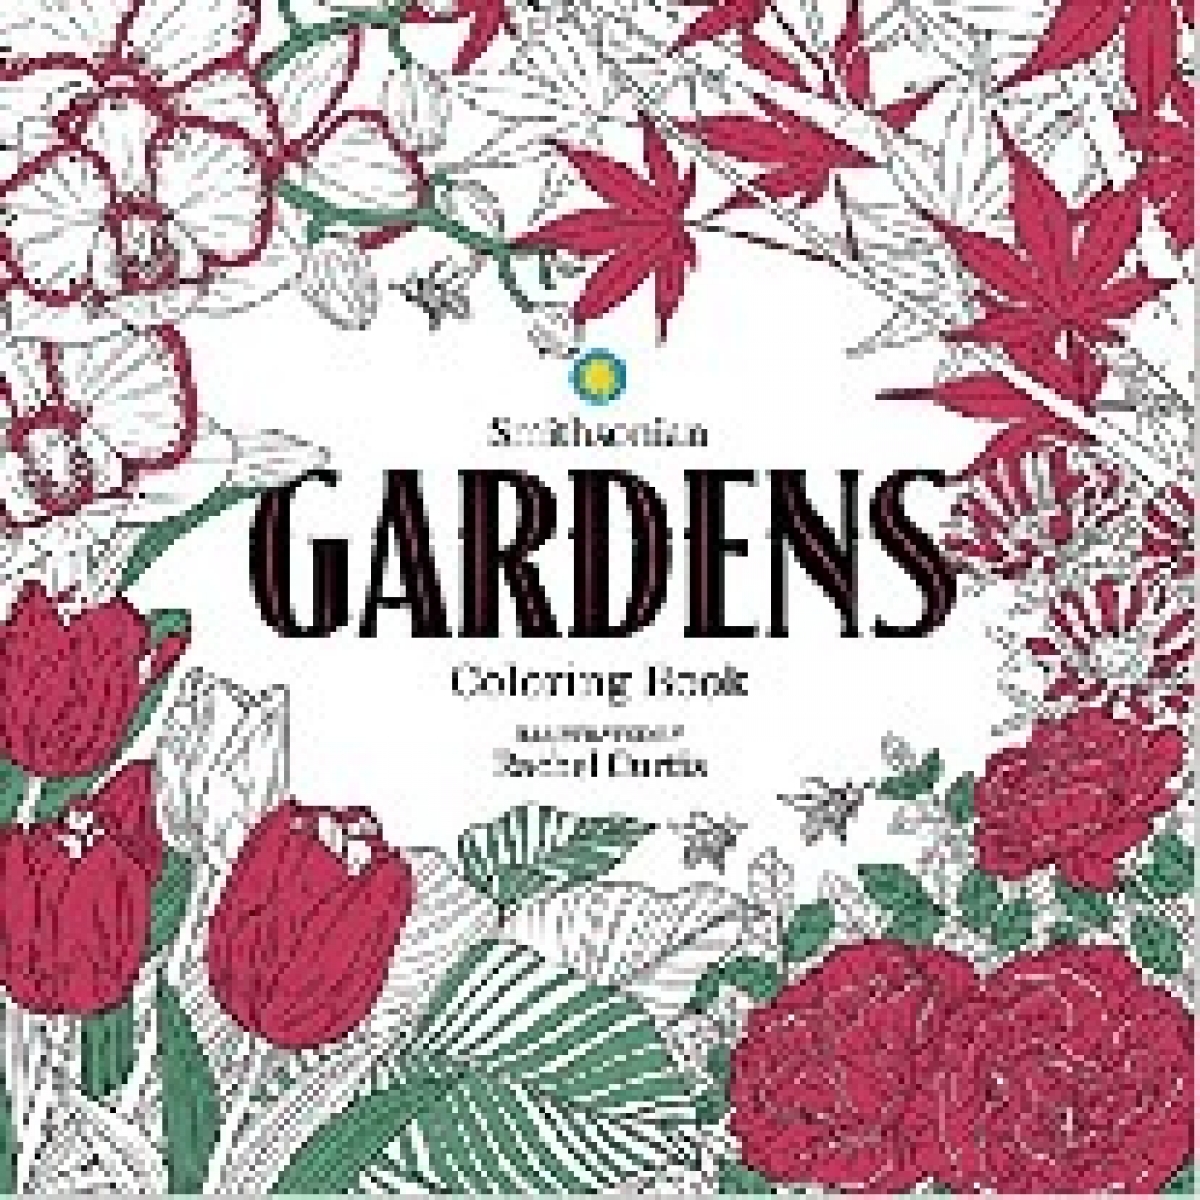 Rachel, Institution, Smithsonian Curtis Gardens: a smithsonian coloring book 